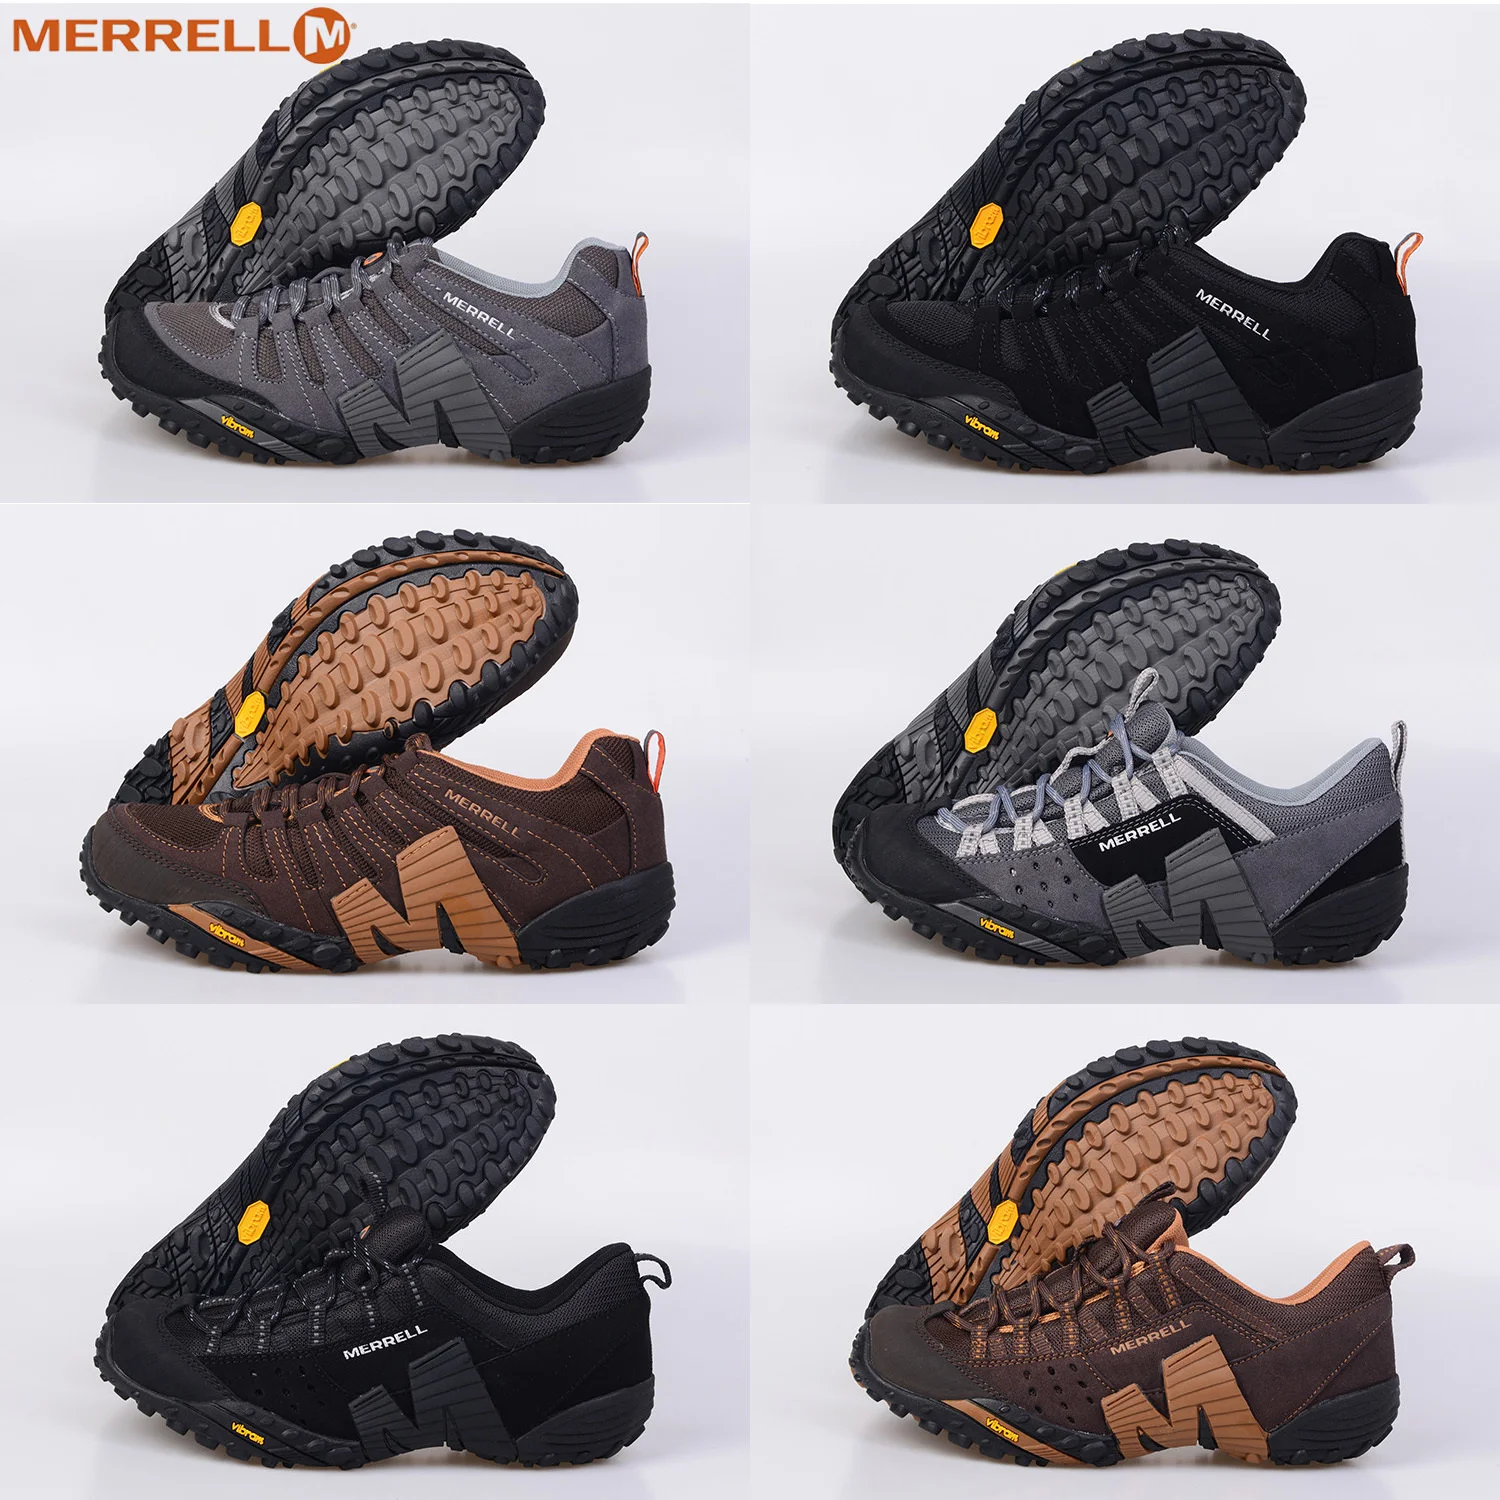 Classic Merrell Men Genuine Leather Outdoor Sport Hiking Shoes For Male Durable Mountain Anti-Slip V Bottom Climb Sneakers 39-45